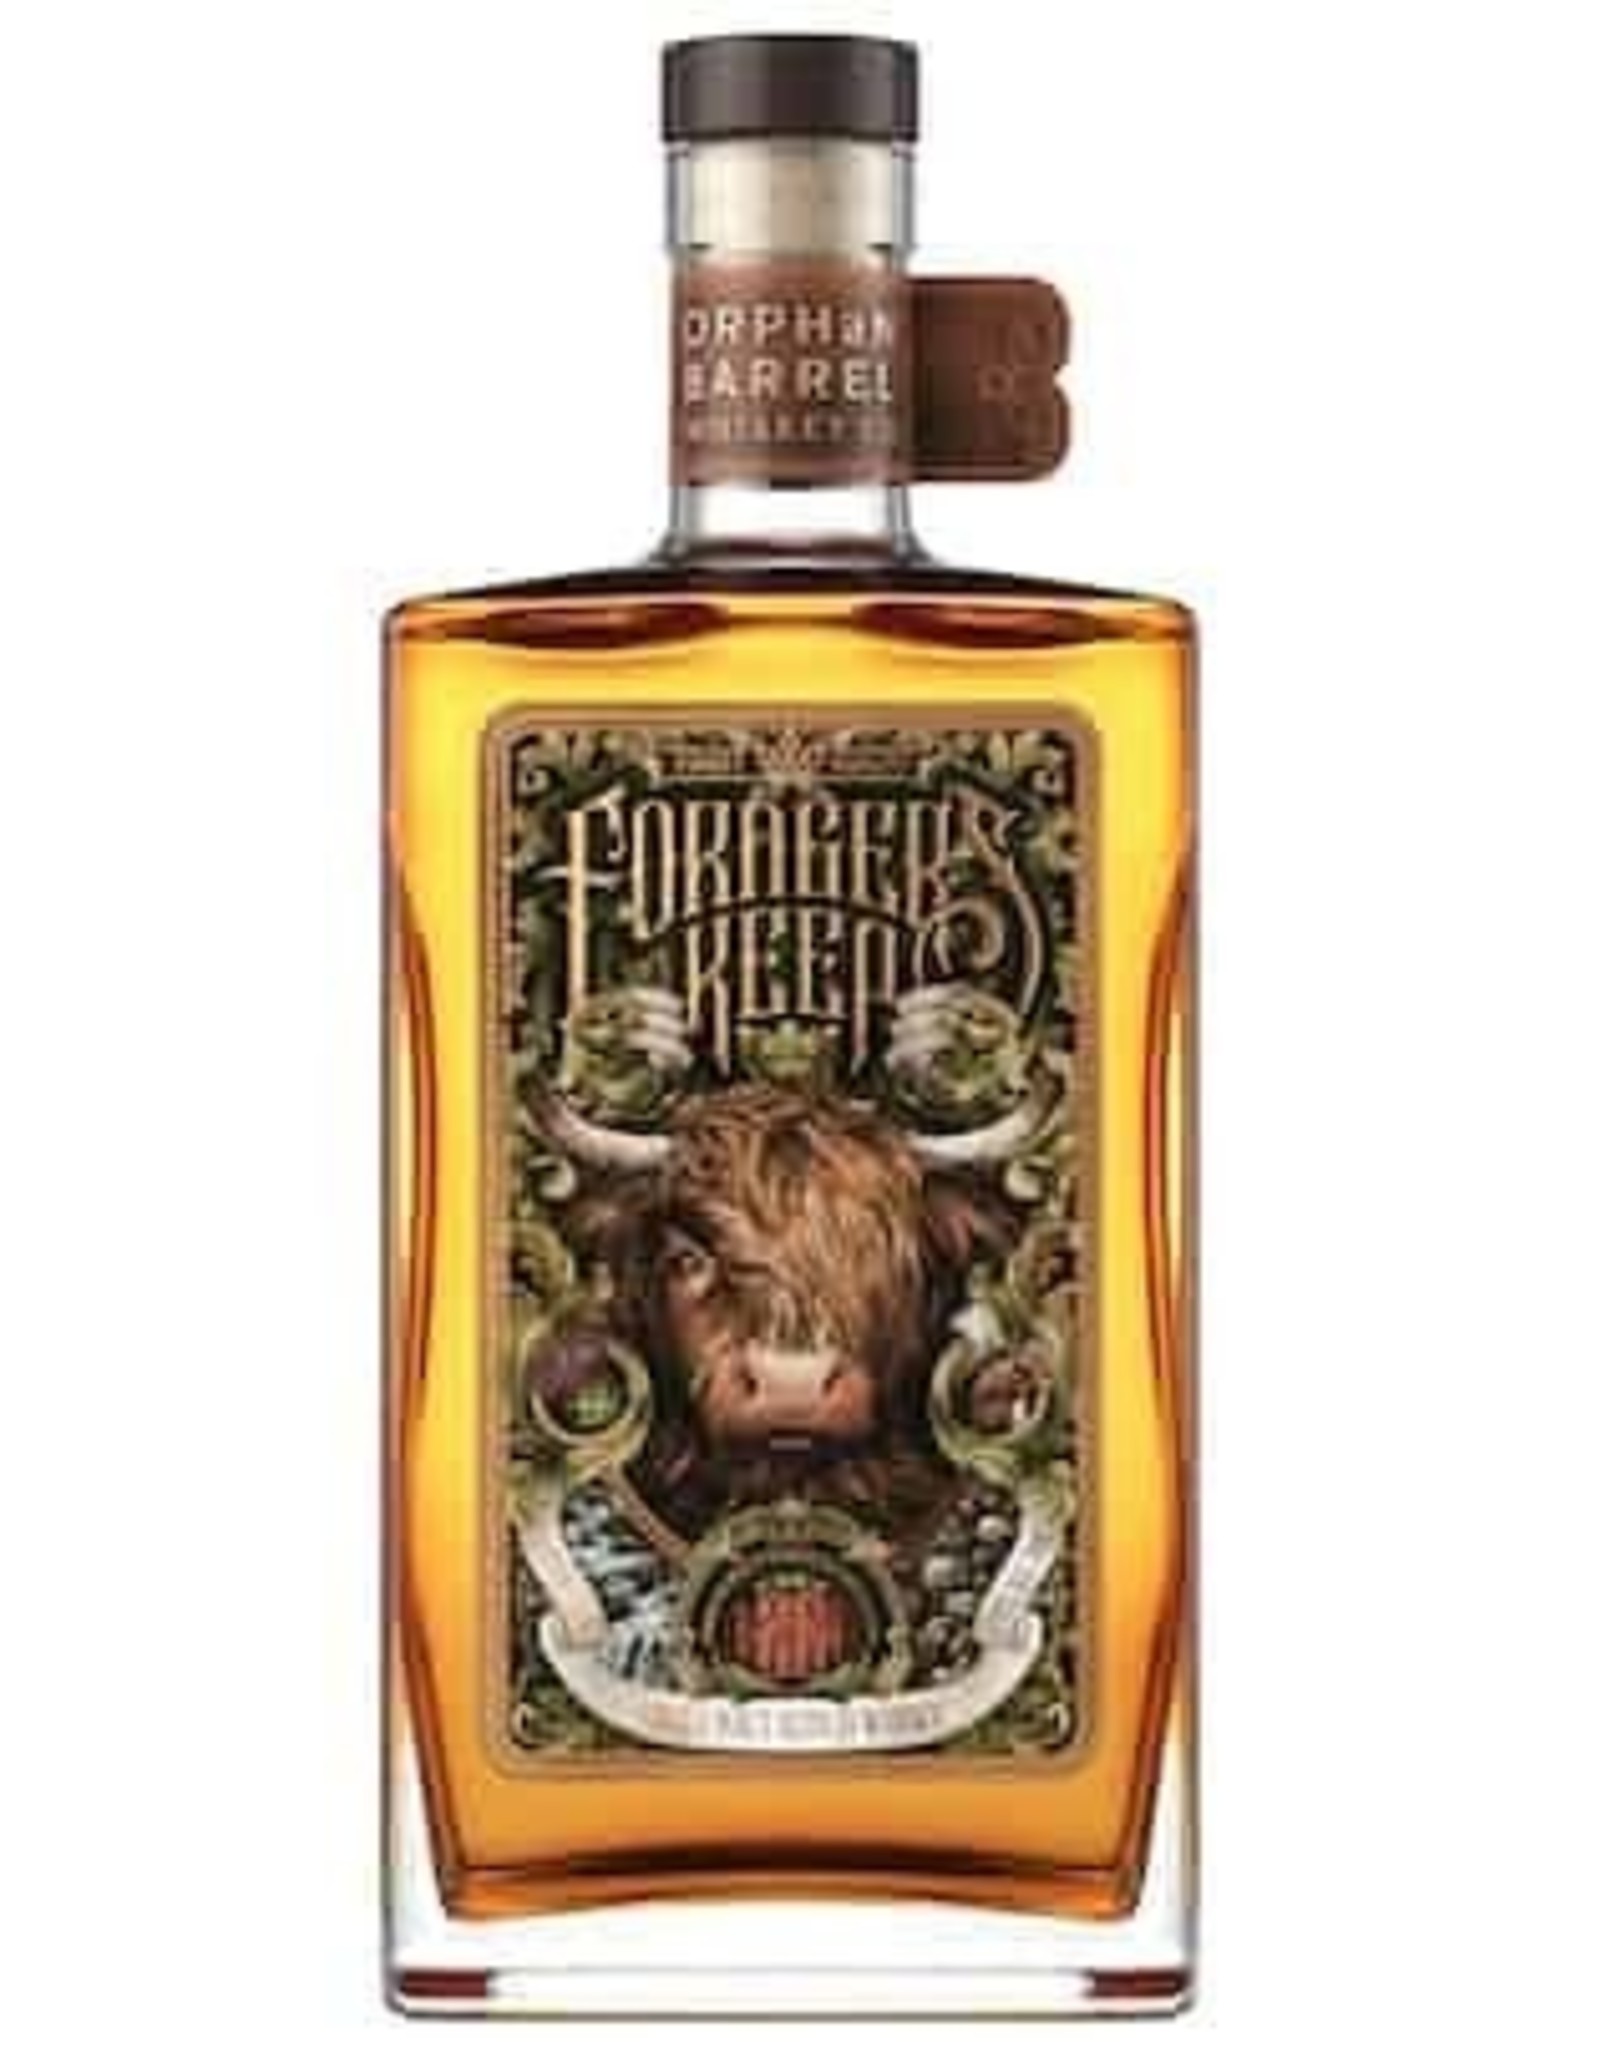 Forager's Forager's Keep Orphan Barrel  Aged 26 years